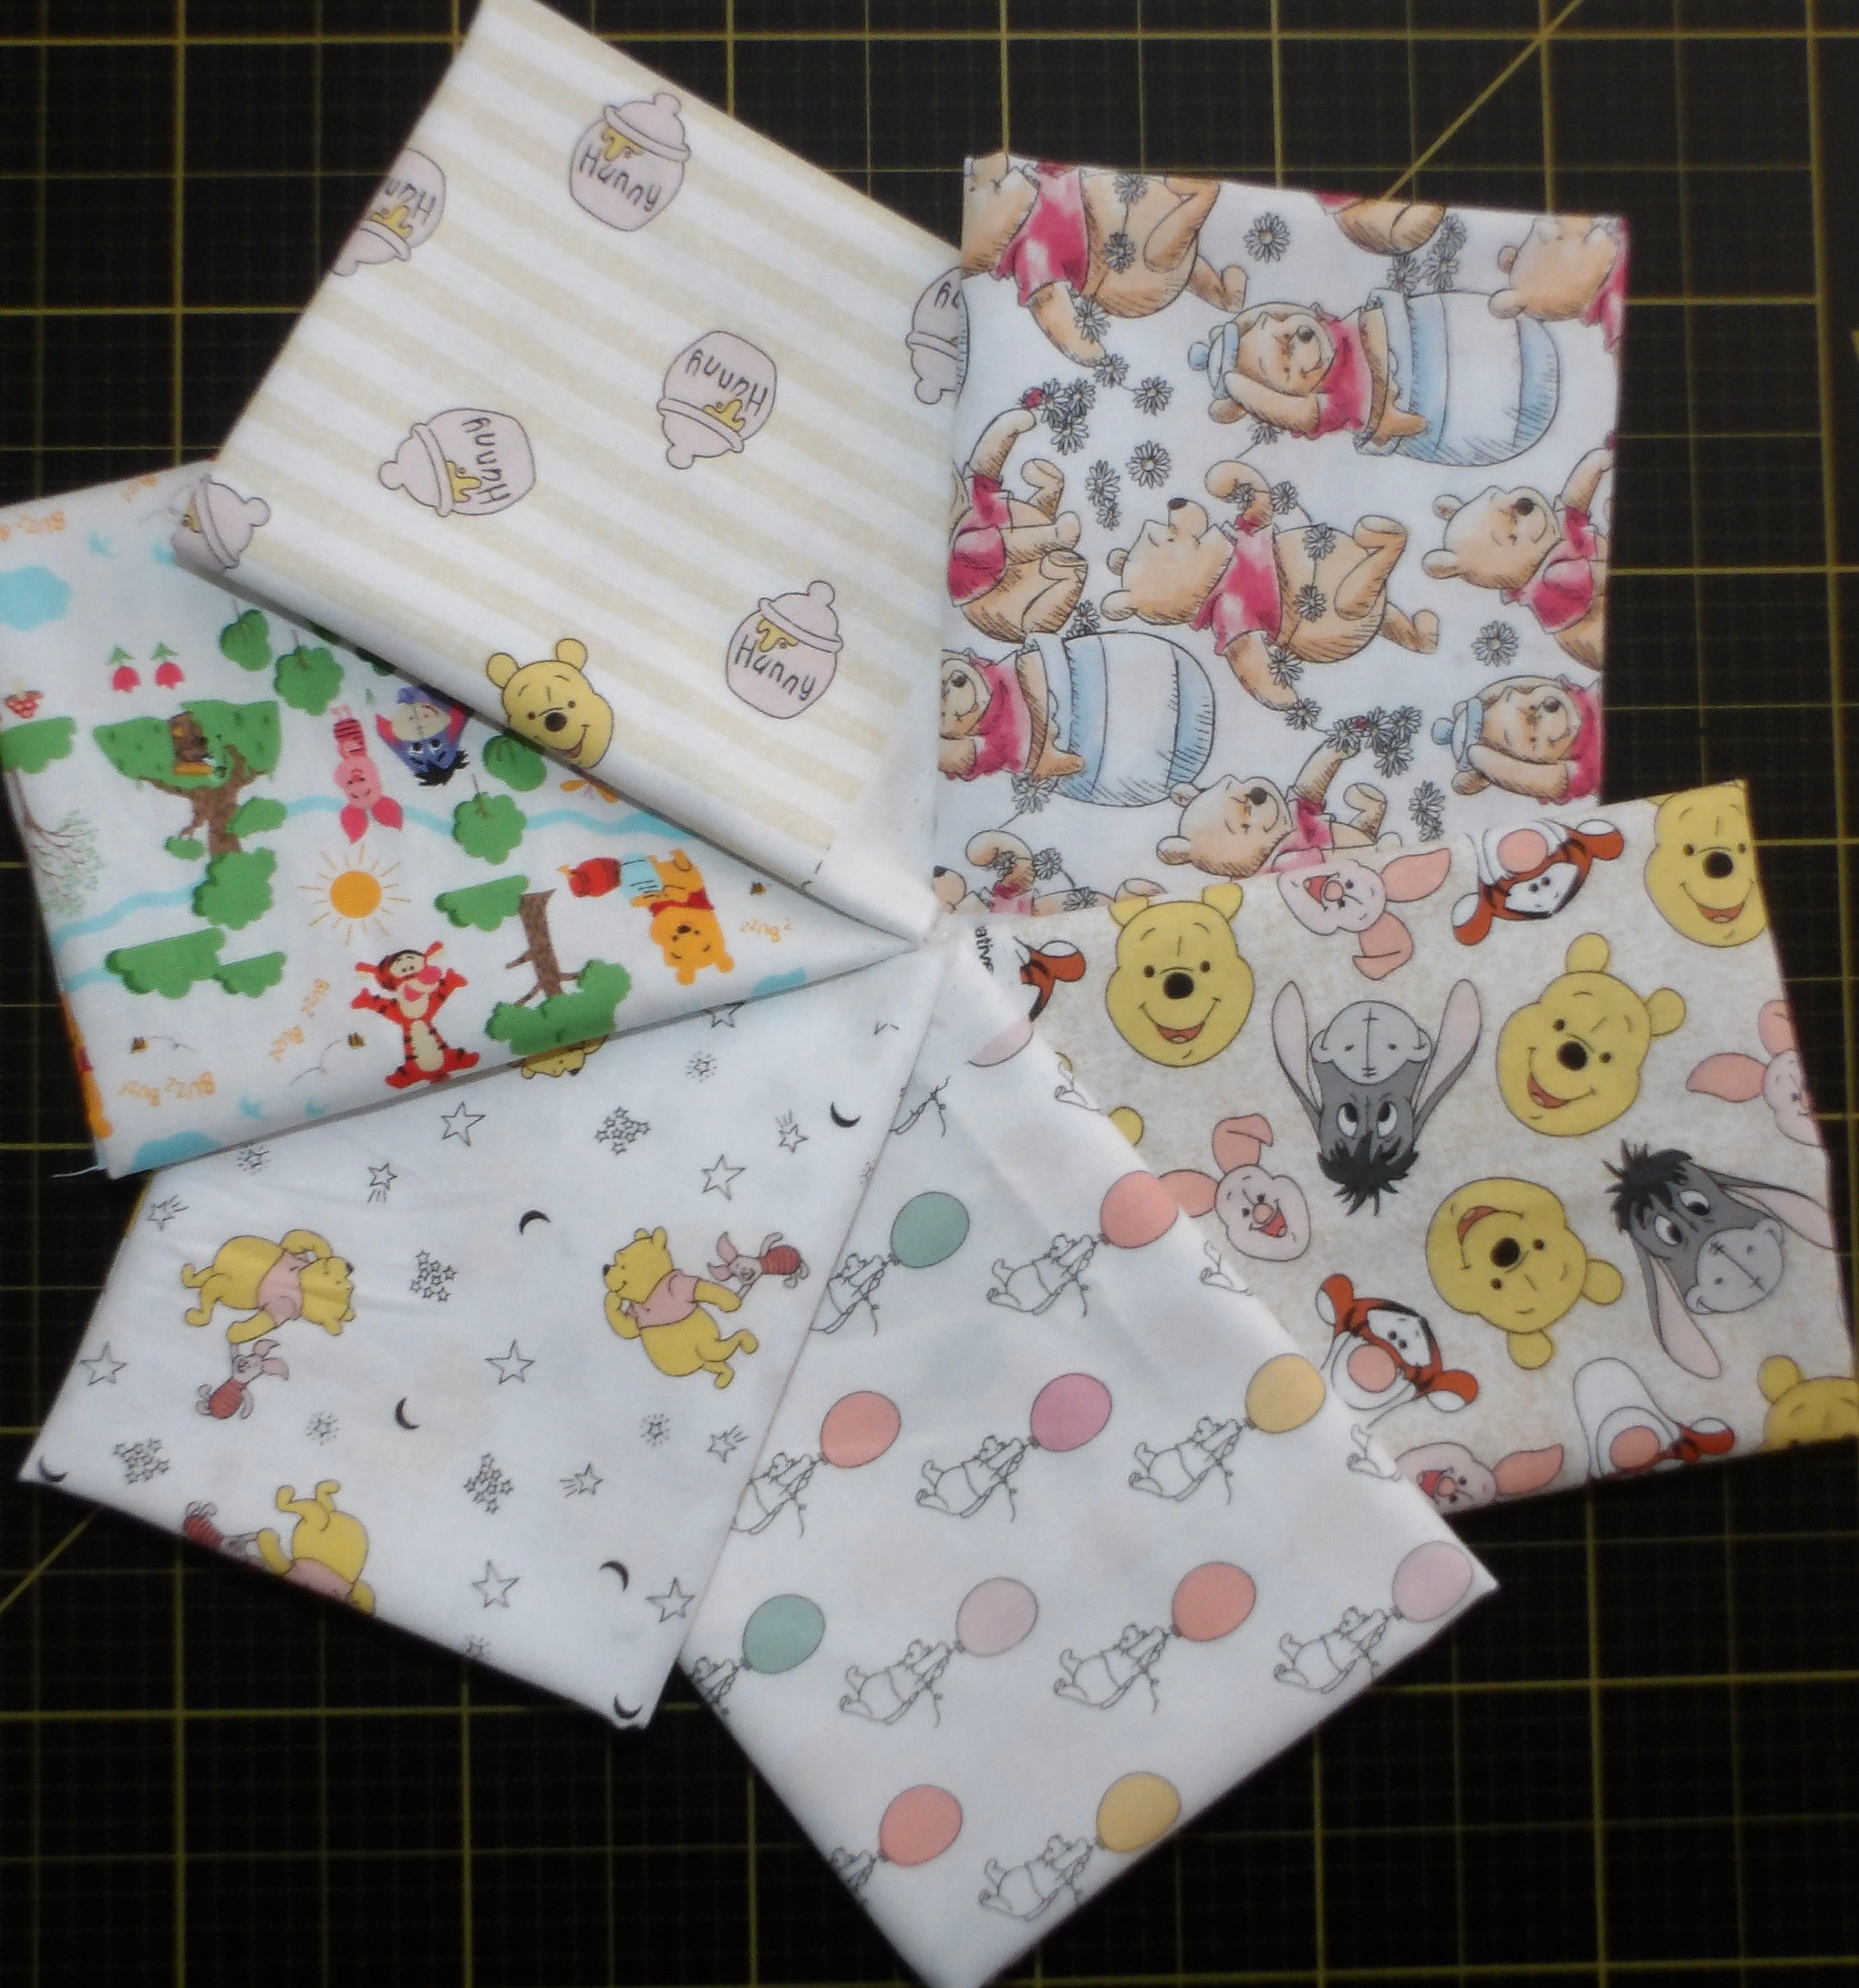 Springs Creative - Winnie The Pooh and Balloon Friends - Authentic Disney  Licensed Fabric - Cotton Quilting 1 1/3 Yard piece